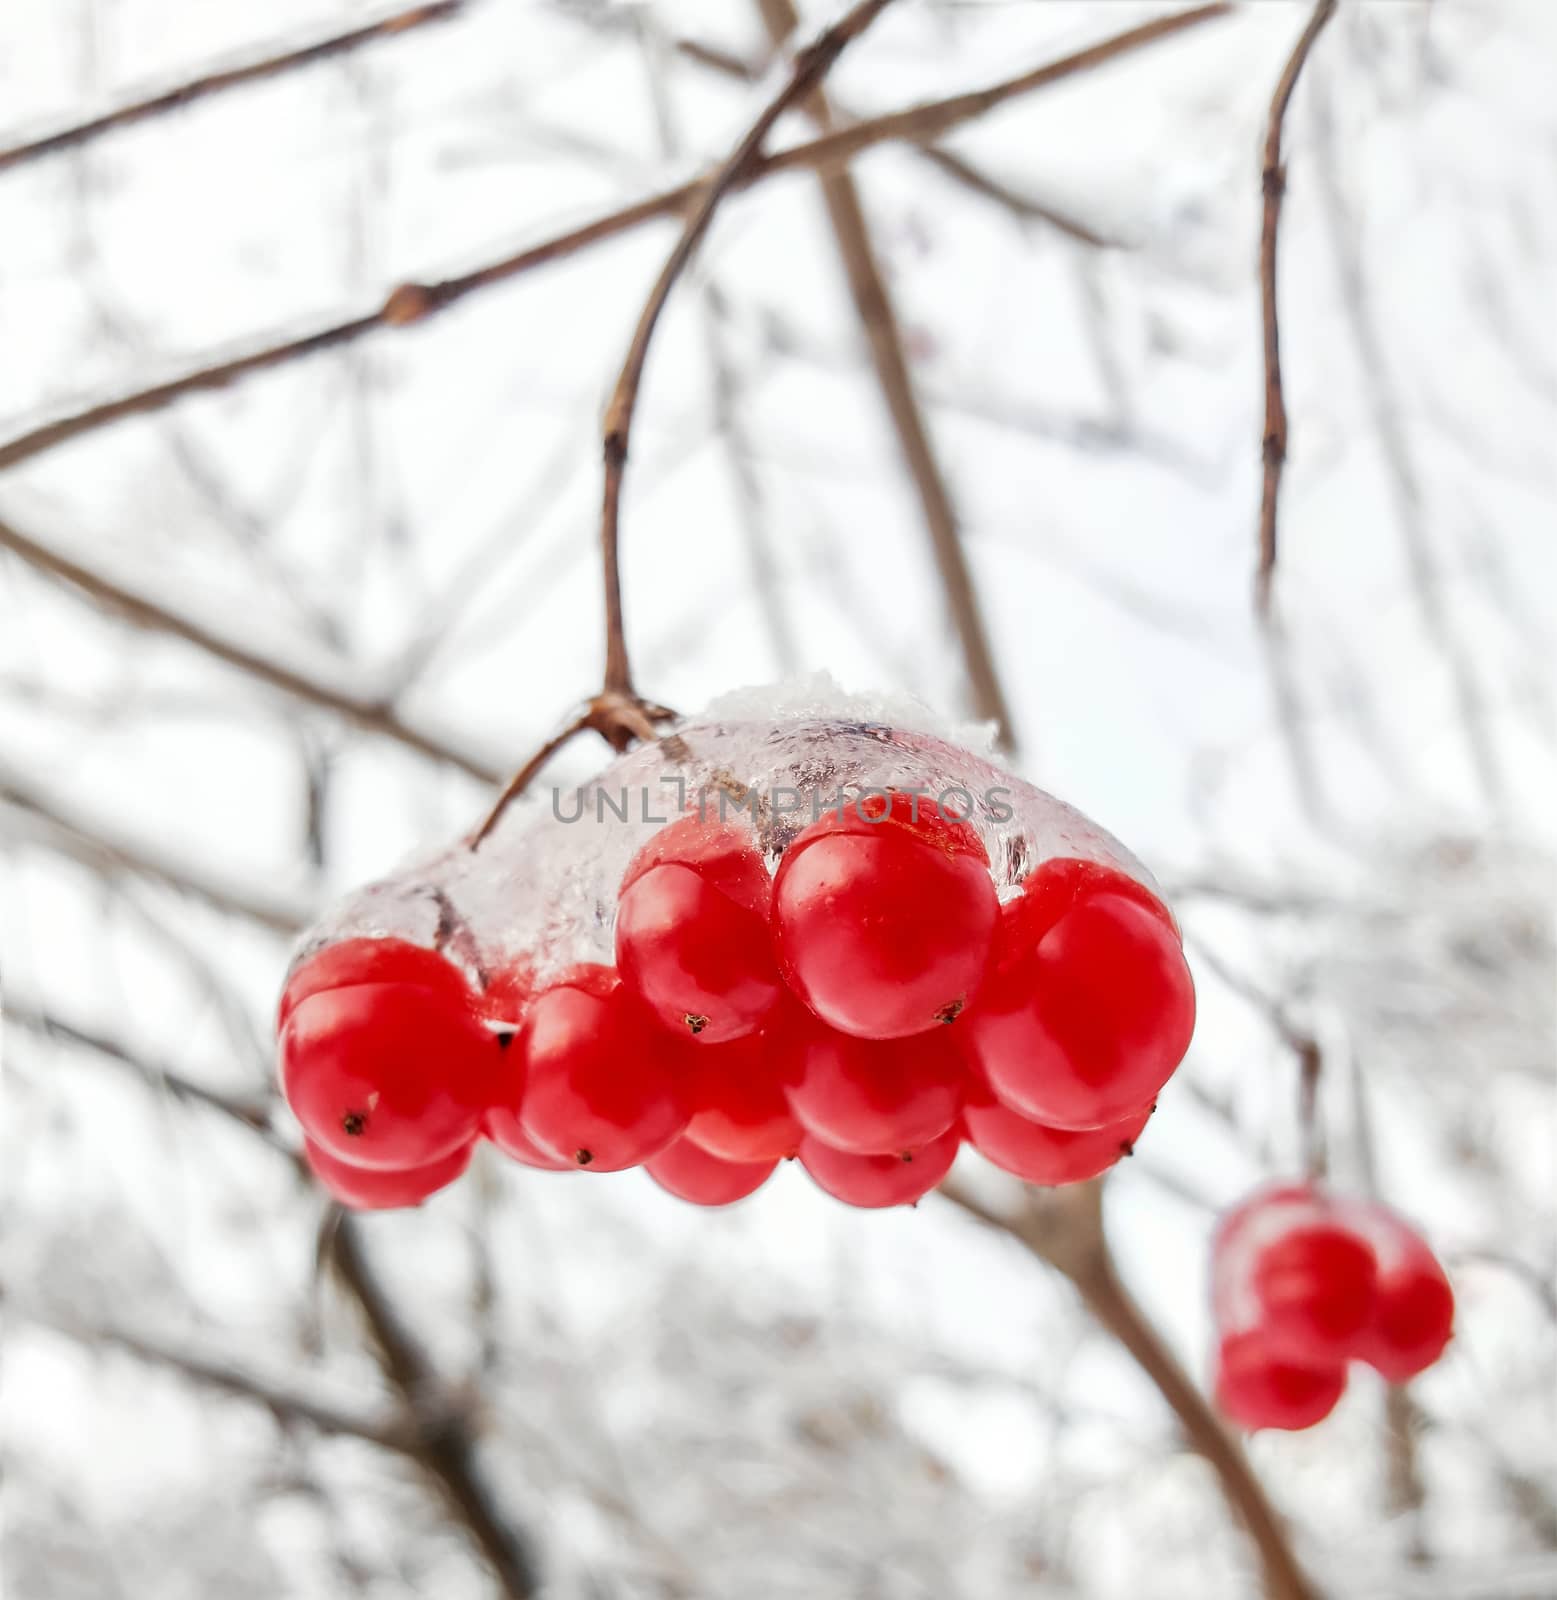 Viburnum branch with red berries in snow. Nature